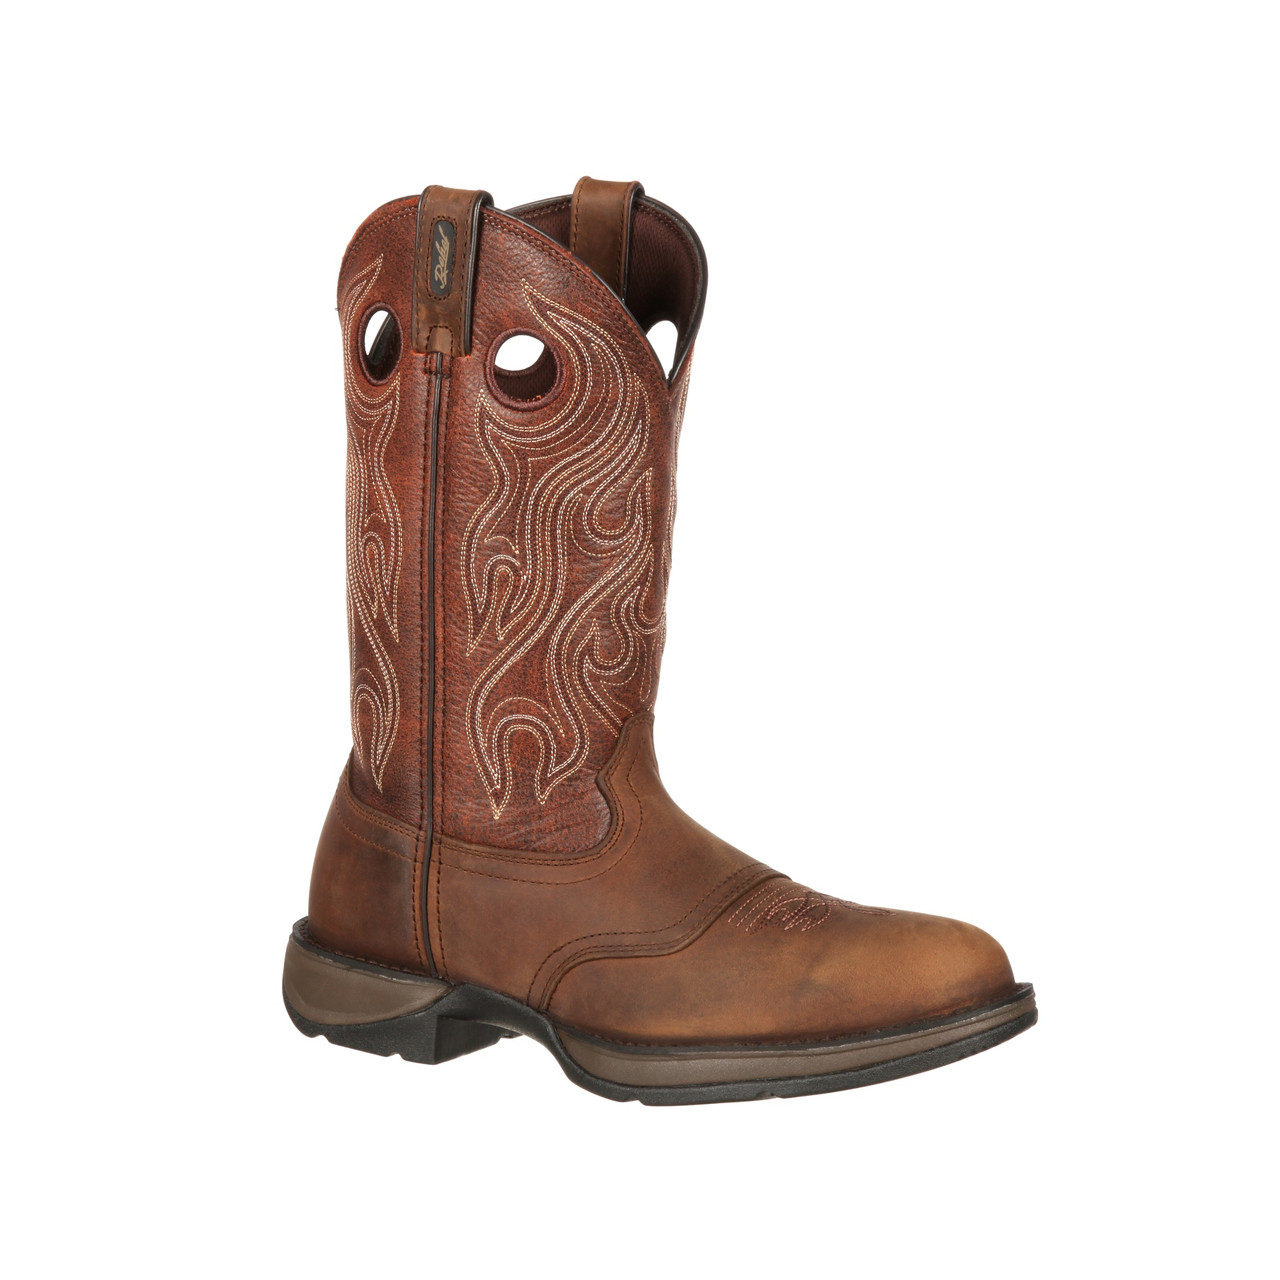 REBEL™ BY DURANGO® BROWN SADDLE WESTERN BOOTS DB5474